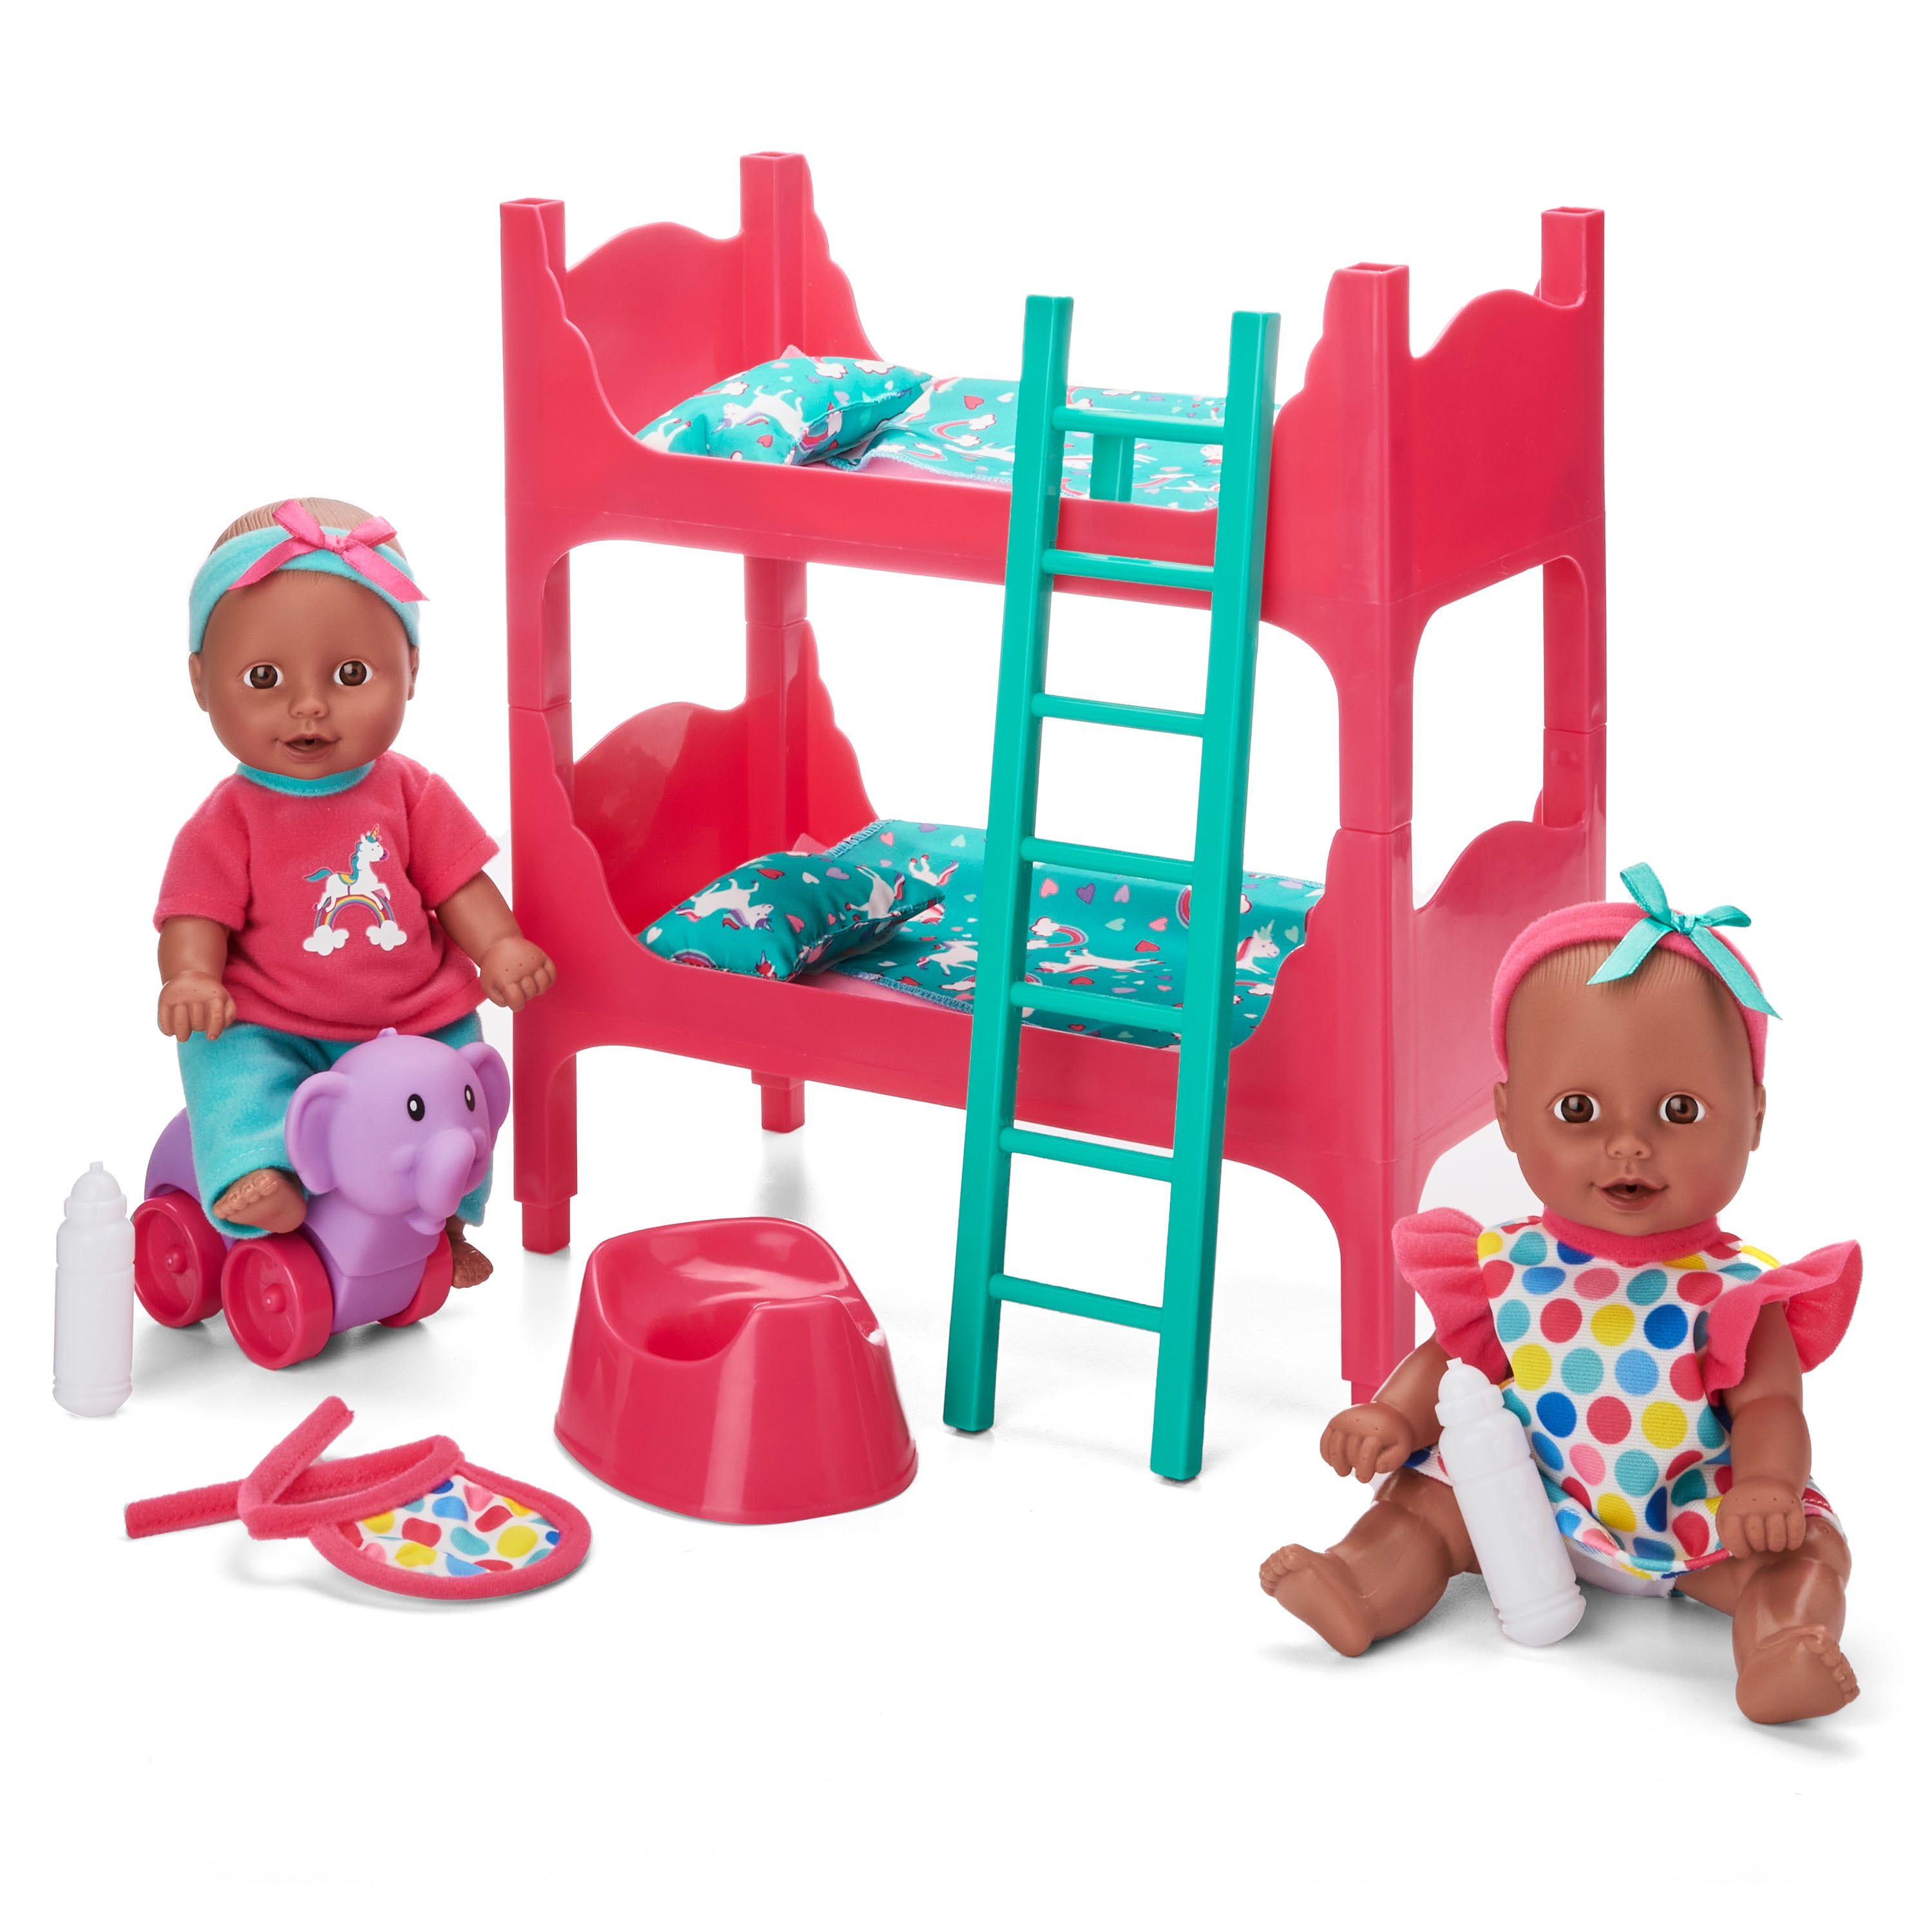 Kid Connection Baby Doll Room Play Set, Bunk Bed For Toddler And Infant